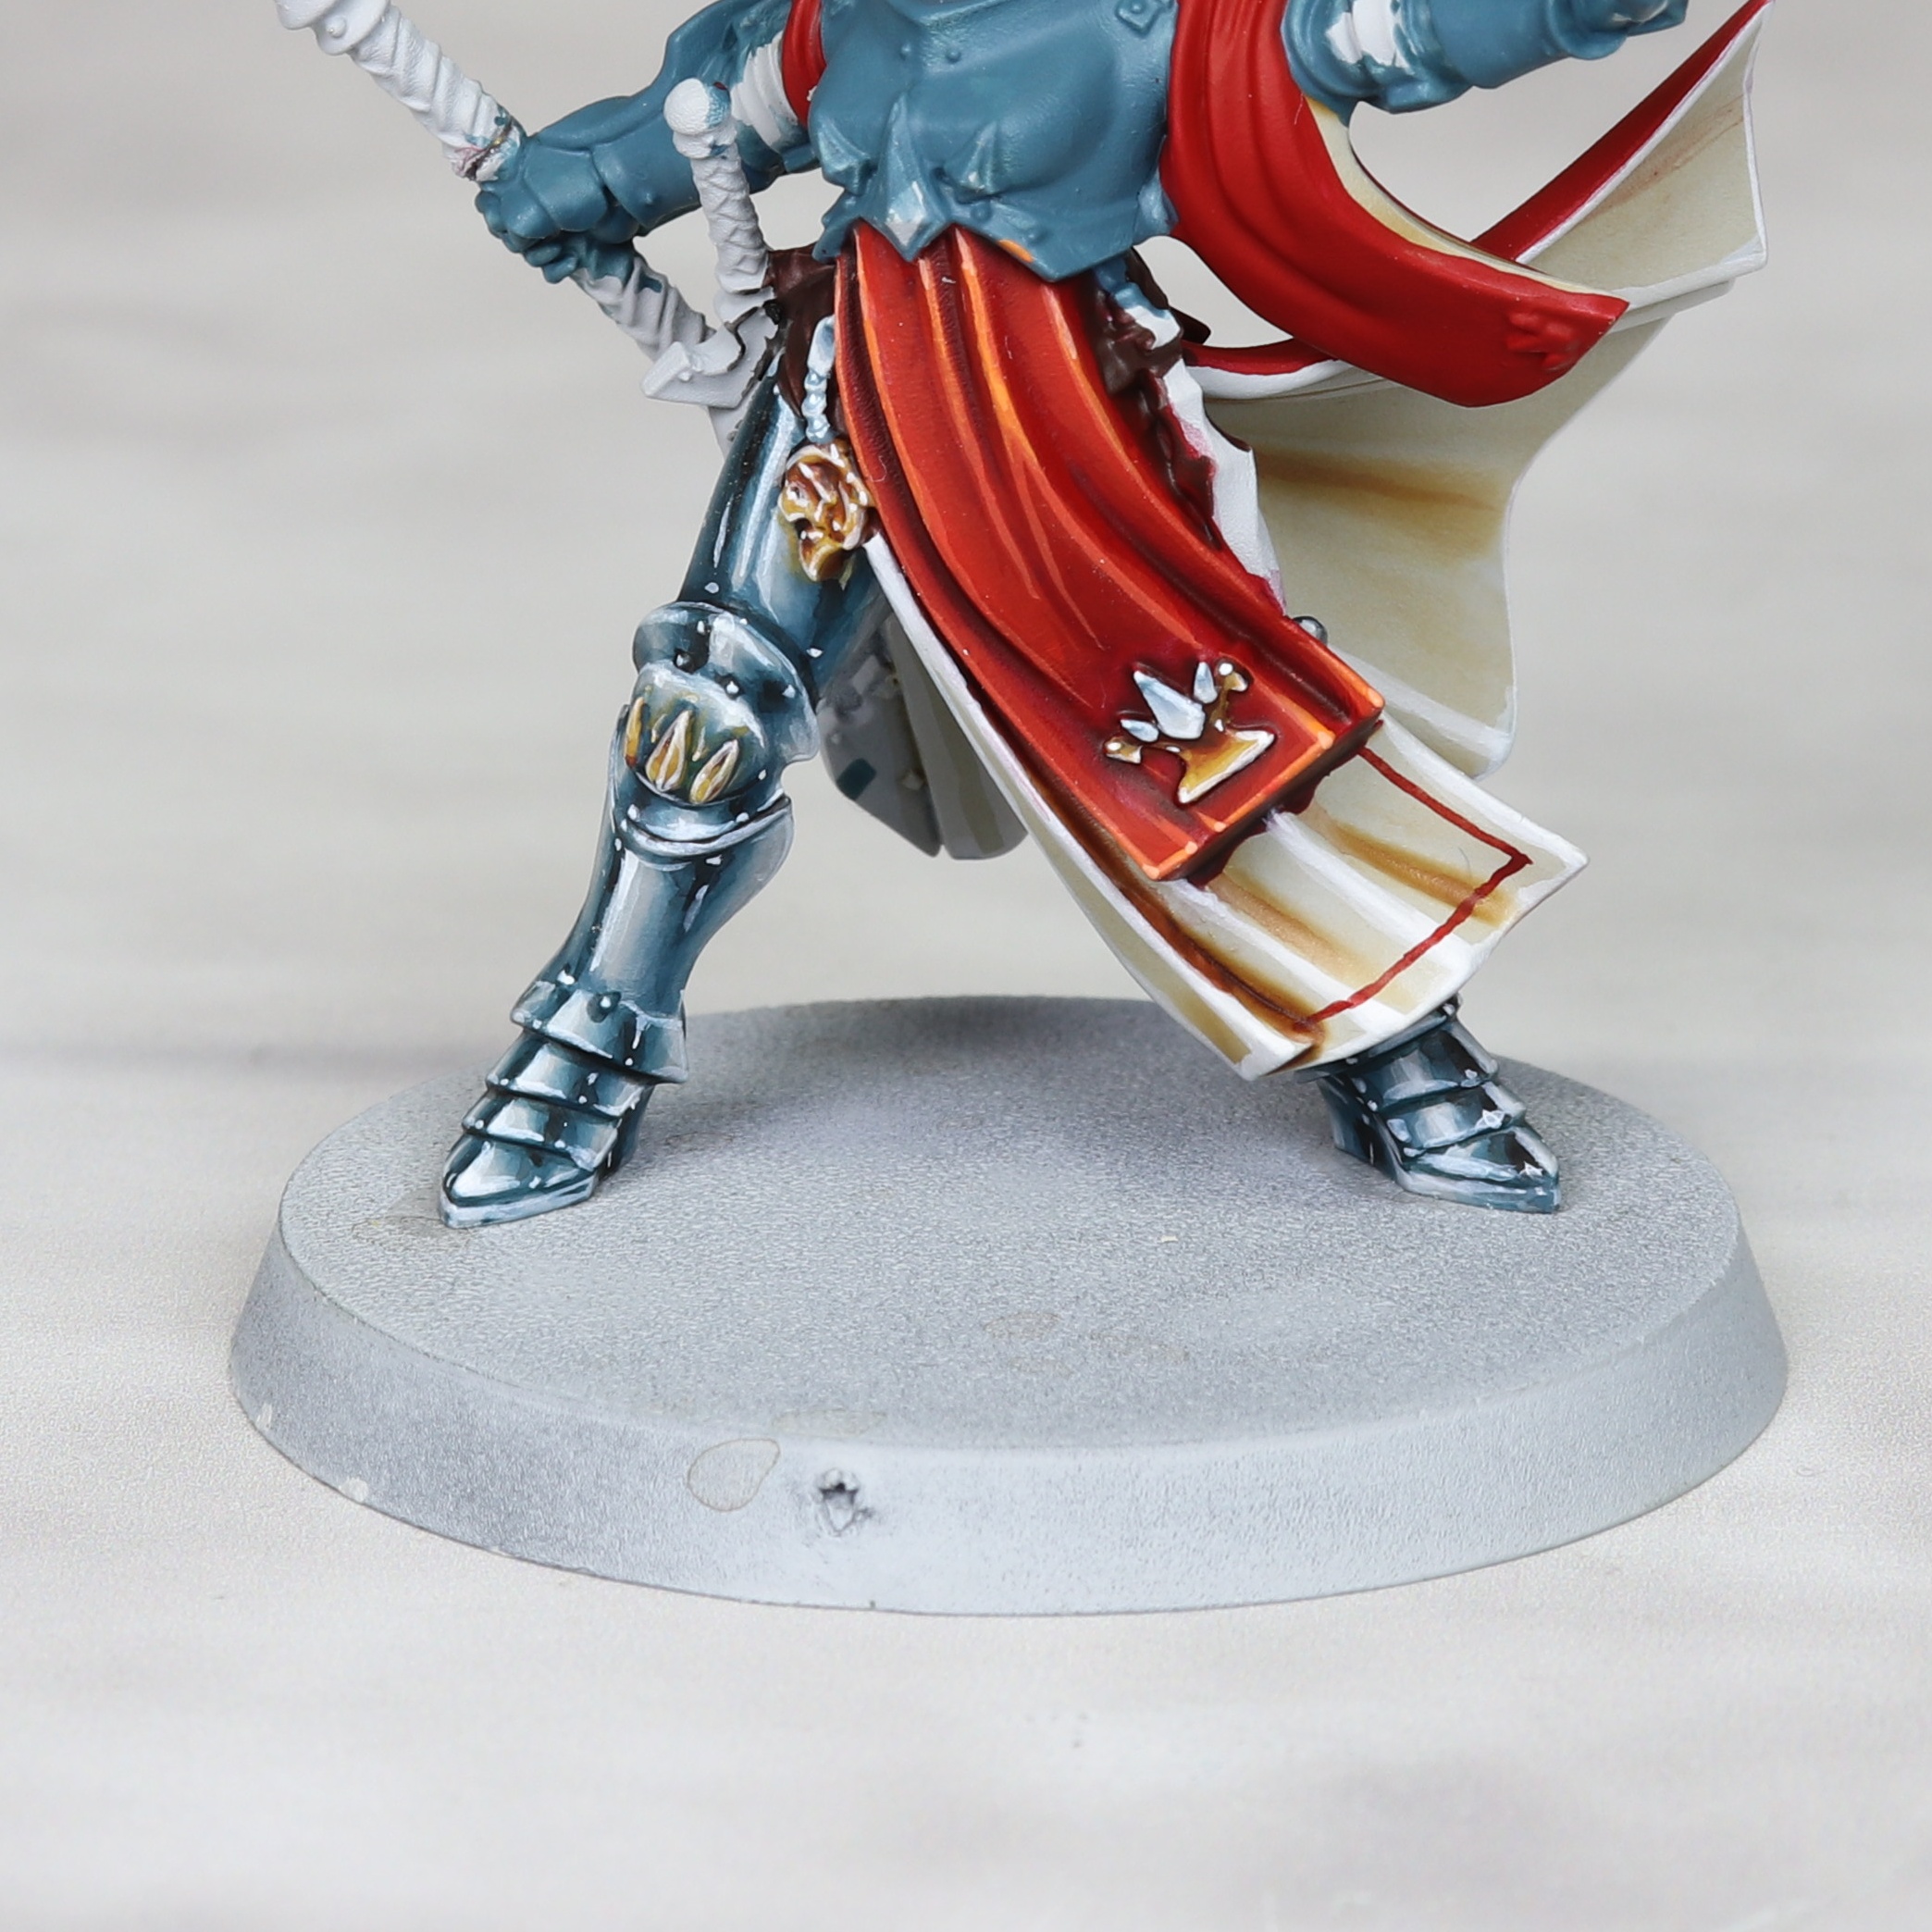 How to Paint - Steel NMM | Creative